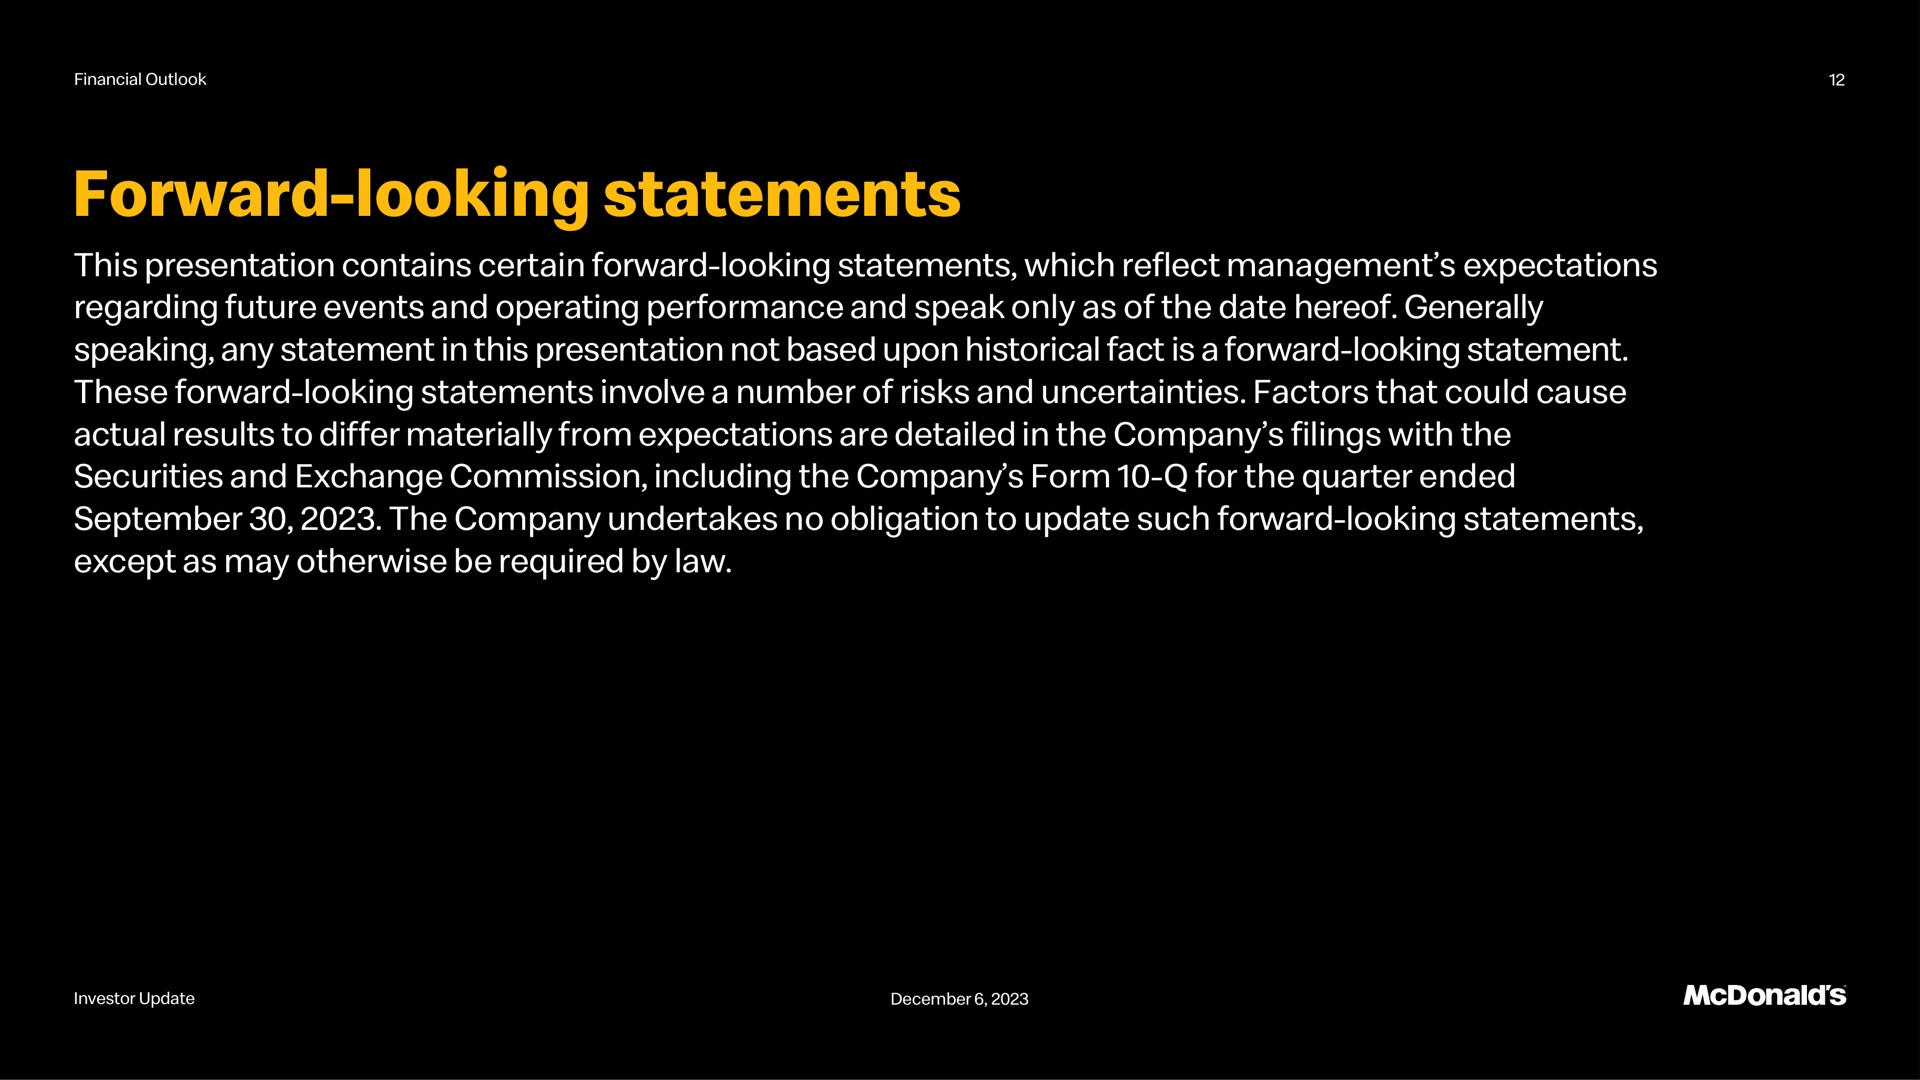 forward looking statements this presentation contains certain which reflect management expectations regarding future events and operating performance and speak only as of the date hereof generally speaking any statement in this presentation not based upon historical fact is a statement these involve a number of risks and uncertainties factors that could cause actual results to differ materially from expectations are detailed in the company filings with the securities and exchange commission including the company form for the quarter ended except as may otherwise be required by law | McDonald's